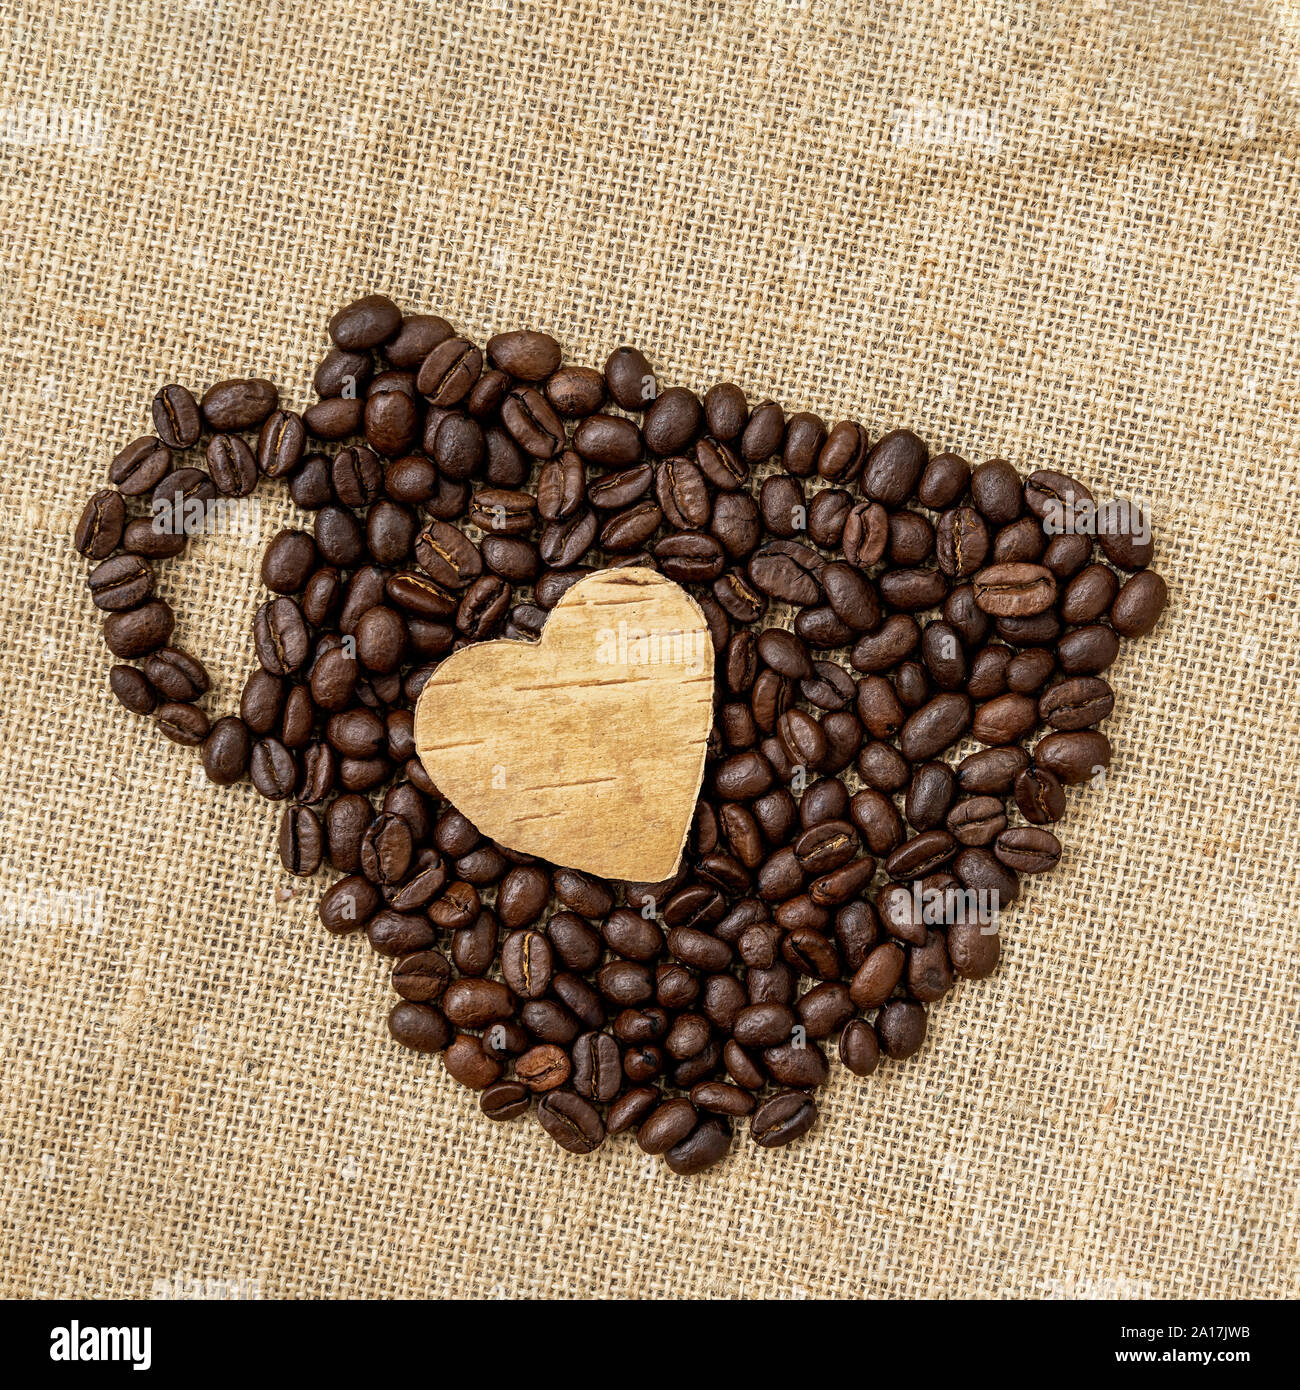 Coffee beans in the shape of a coffee cup with carved wooden heart on natural canvas, sackcloth. Concept of coffee love, loved one Stock Photo